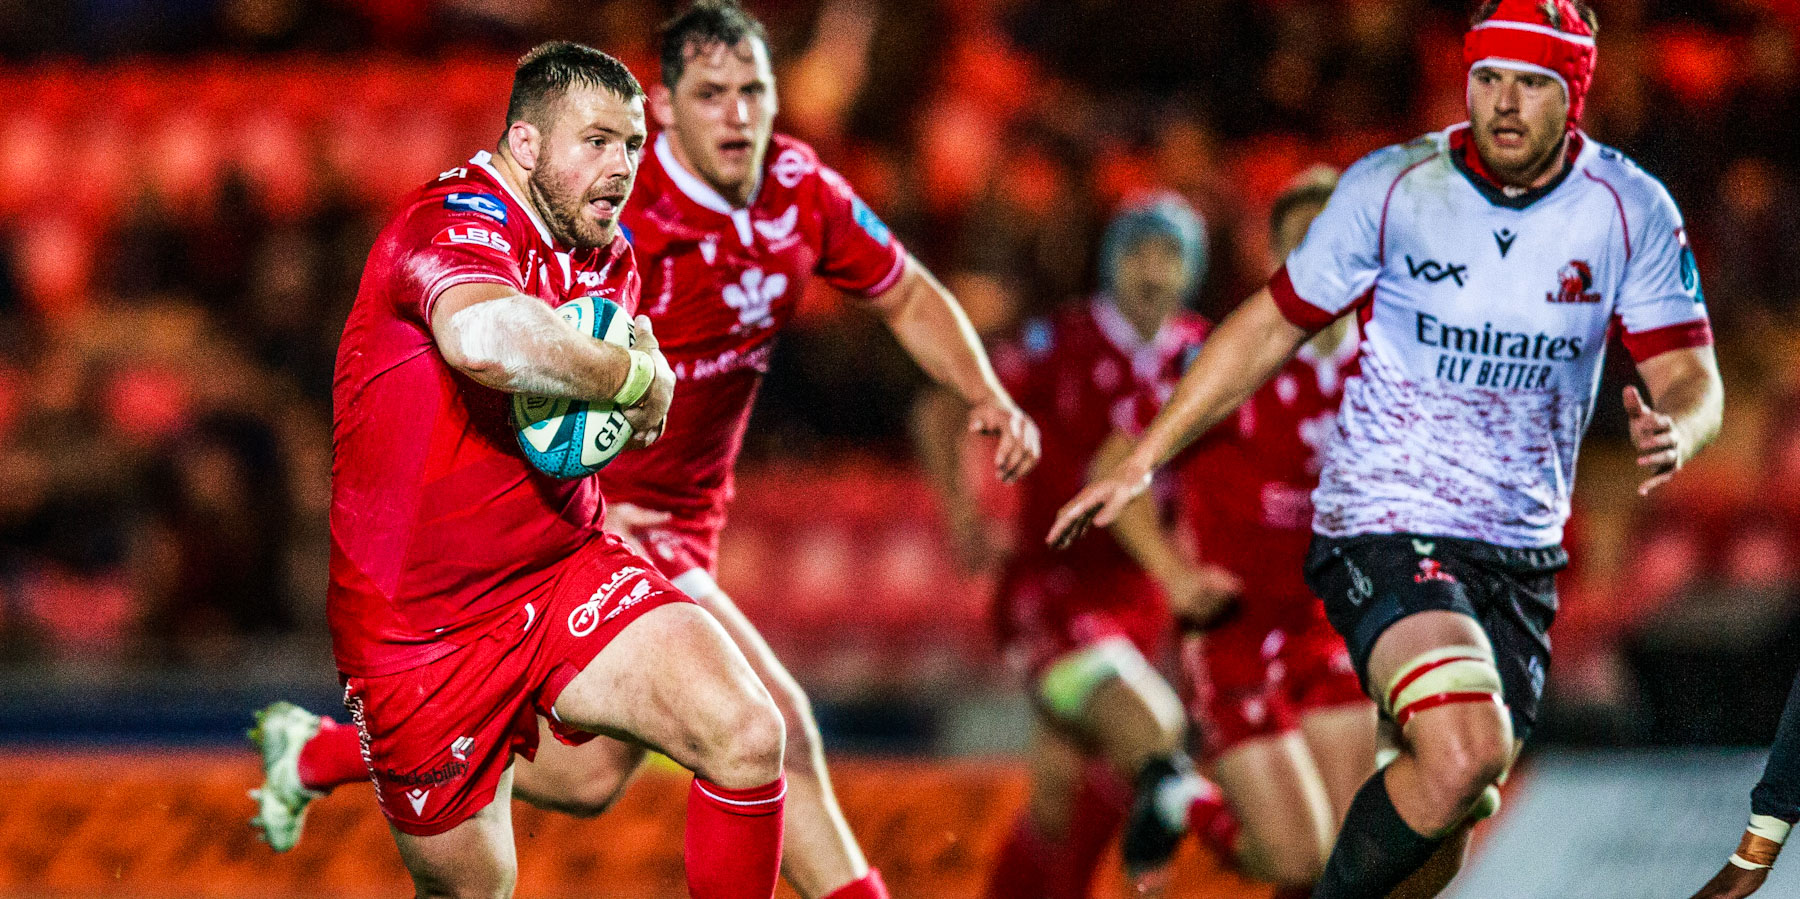 Scarlets in action against the Emirates Lions last year.